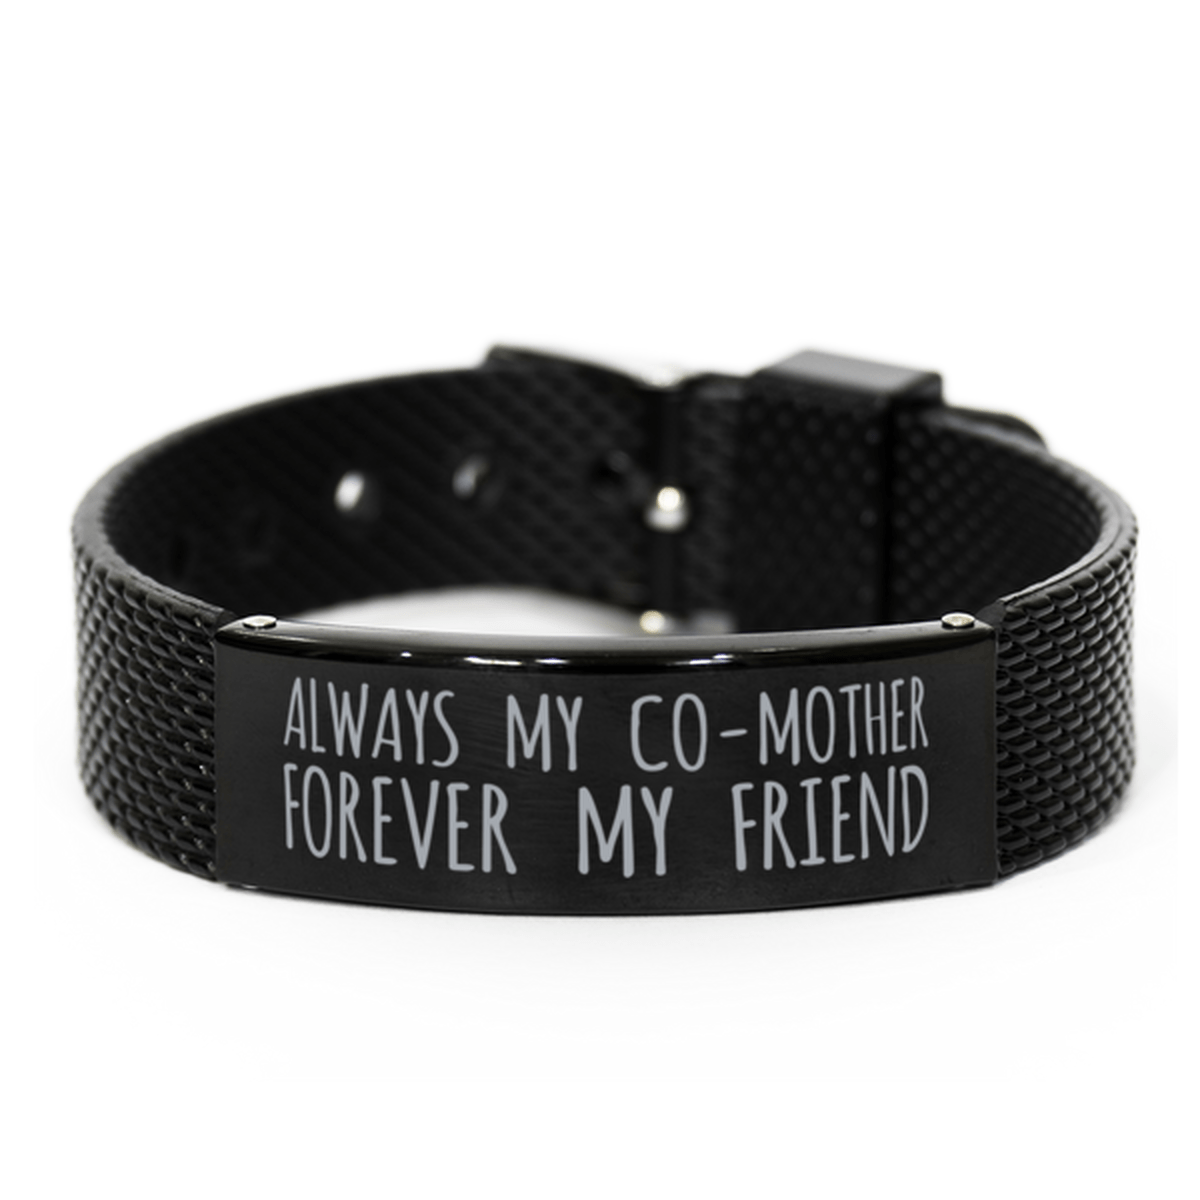 Inspirational Co-Mother Black Shark Mesh Bracelet, Always My Co-Mother Forever My Friend, Best Birthday Gifts for Family Friends